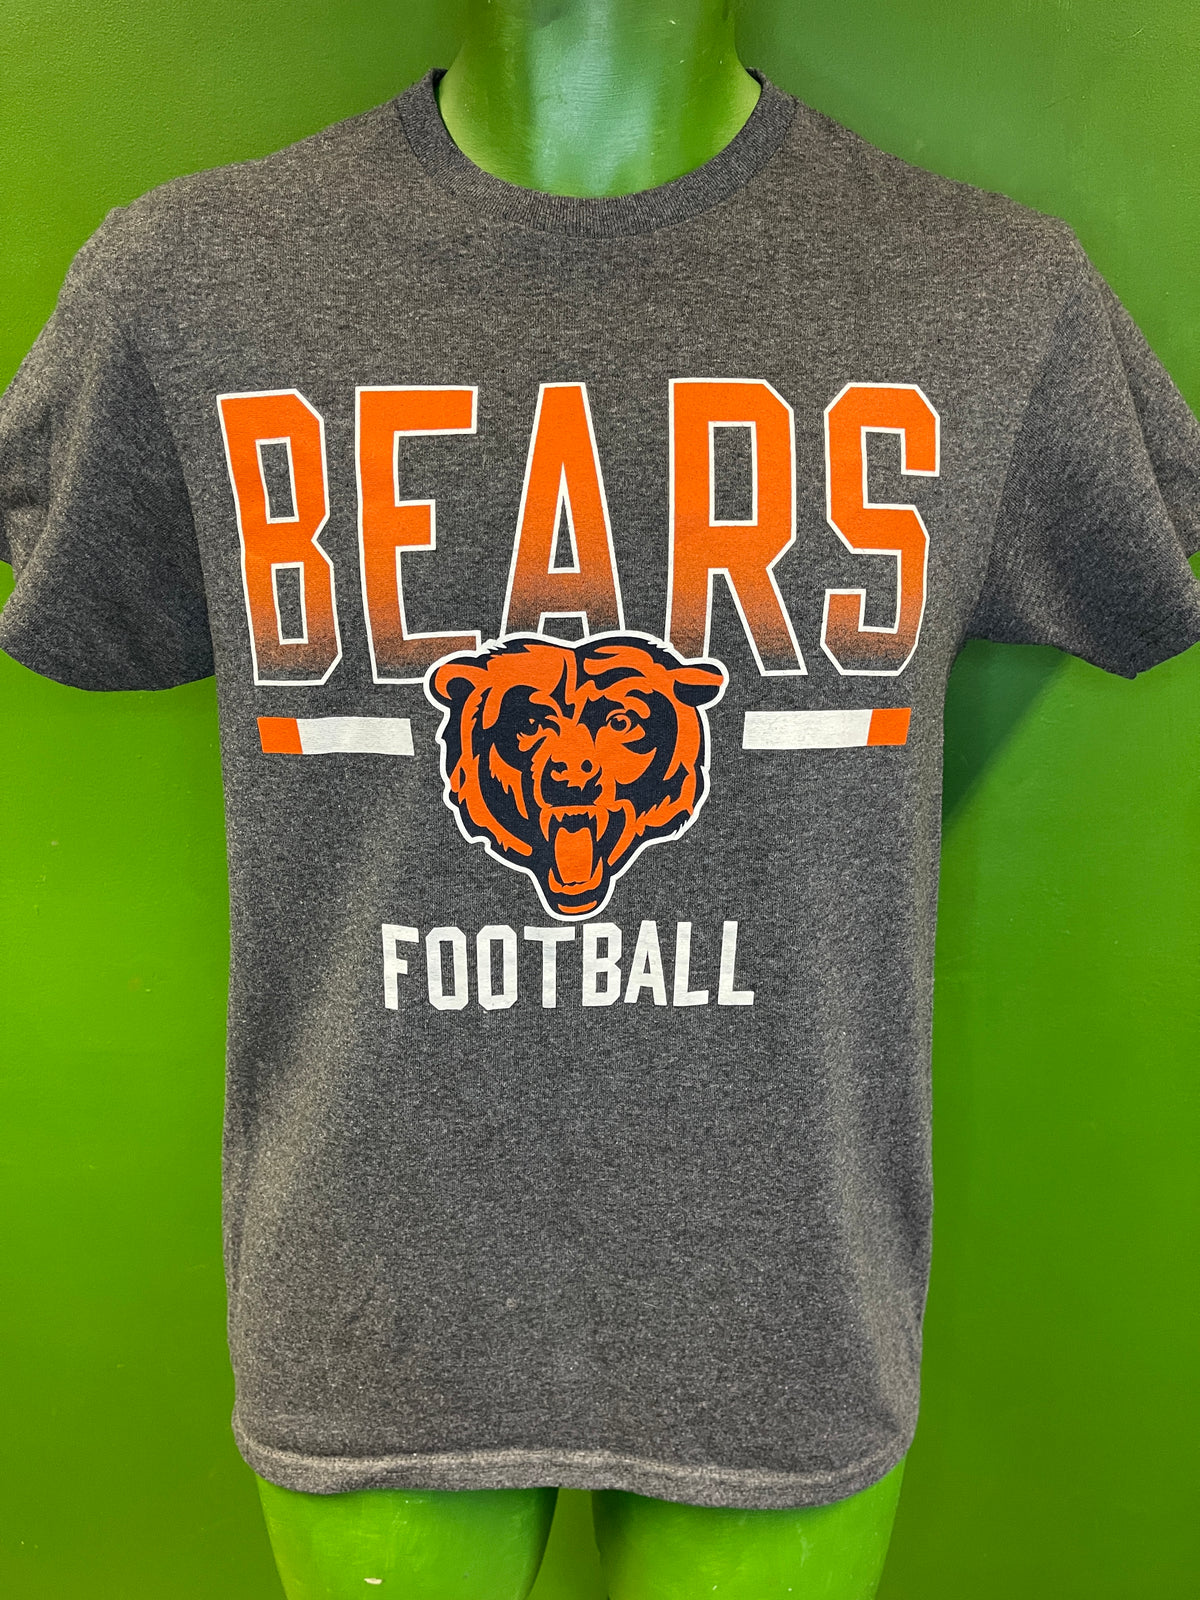 NFL Chicago Bears Junk Food Heathered Grey T-Shirt Men's Small